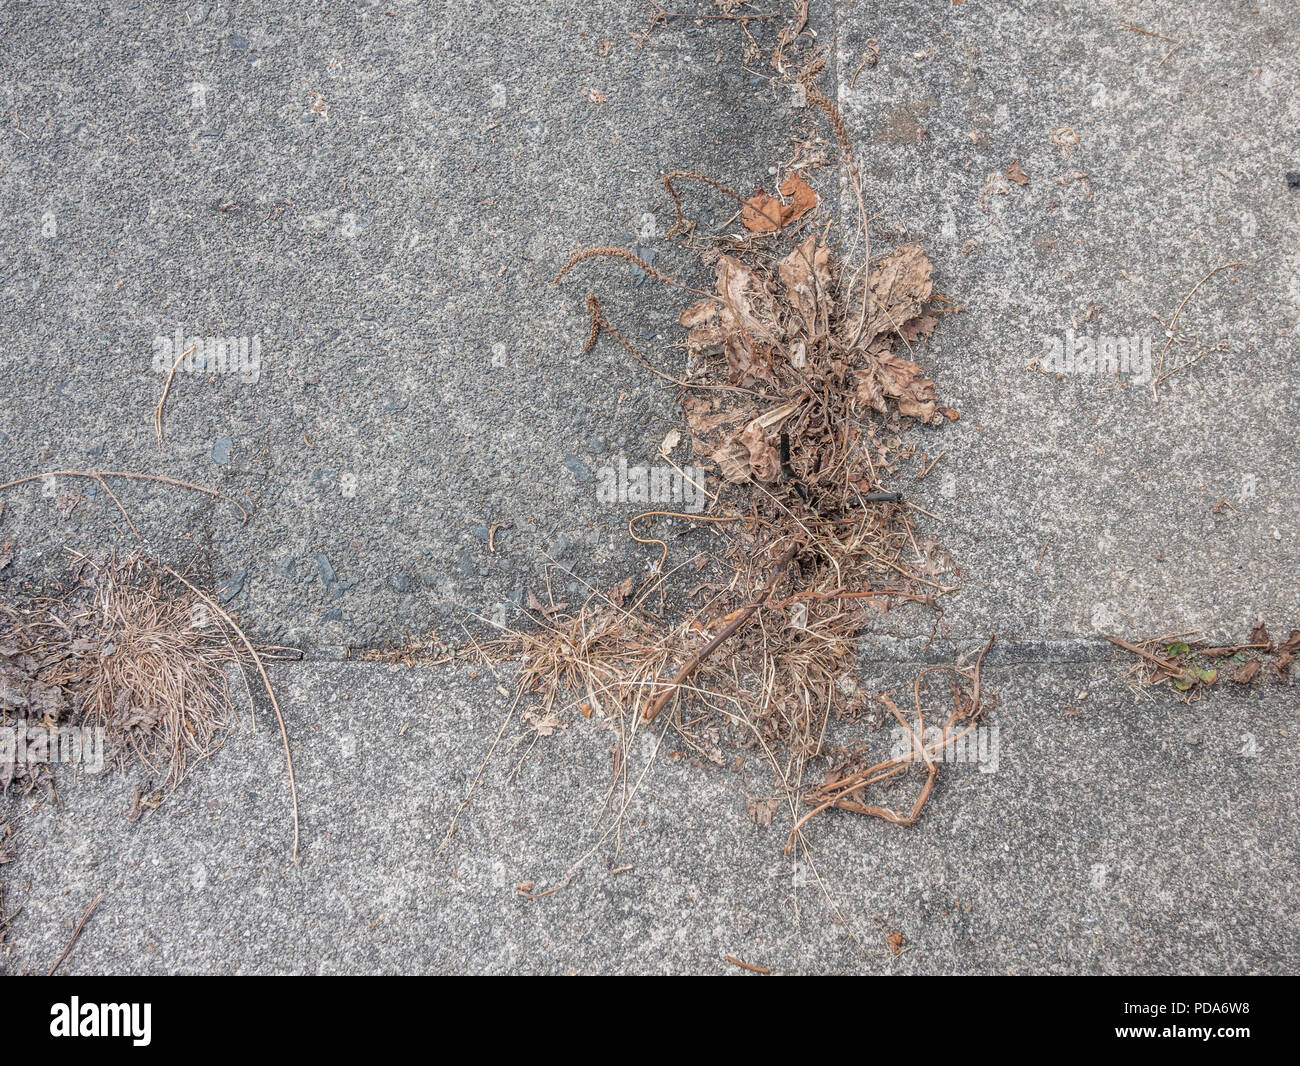 Dead weeds growing from cracks in paving stones during UK 2022 drought / heatwave - more likely killed with a weedkiller like Roundup / glyphosate. Stock Photo